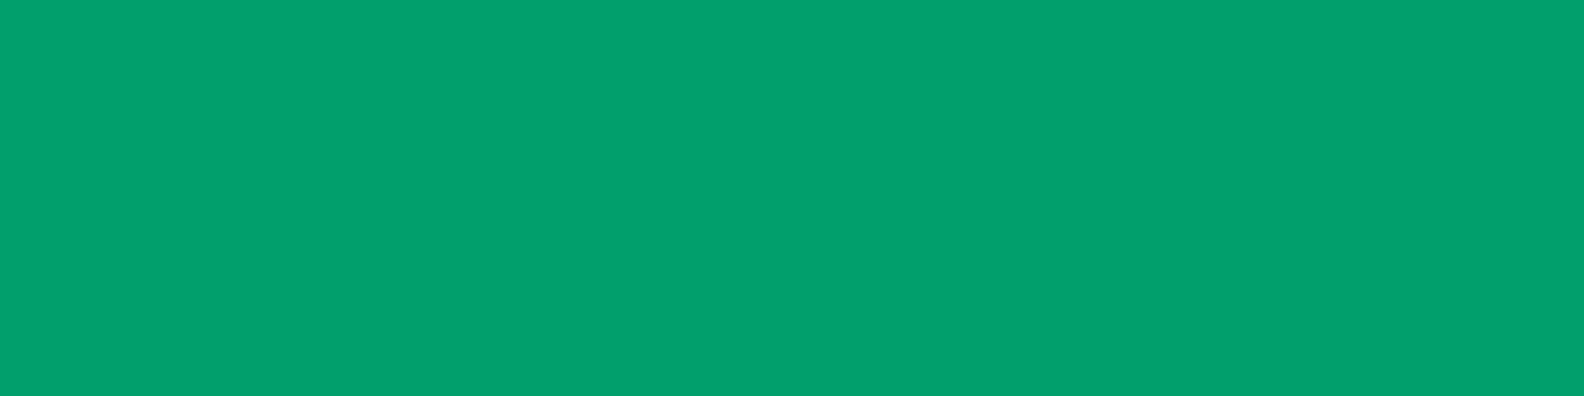 1584x396 Green NCS Solid Color Background